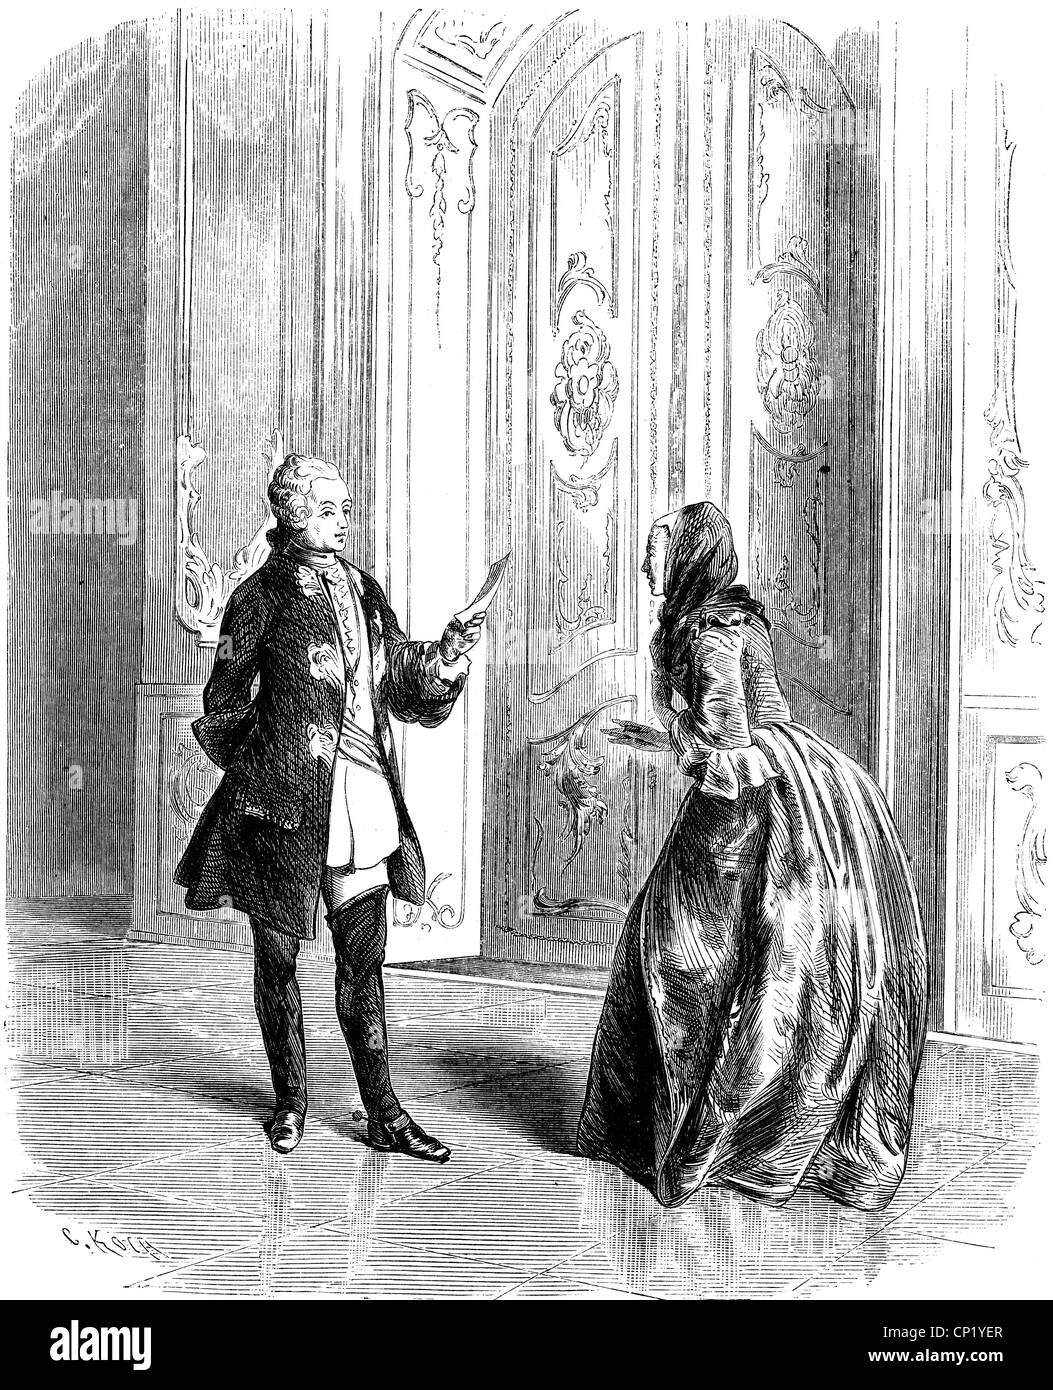 Frederick II 'the Great', 24.1.1712 - 17.6.1786, King of Prussia 31.5.1740 - 17.6.1786, meeting the actress Friederike Caroline Neuber in Dresden, December 1756, wood engraving, 19th century, Stock Photo